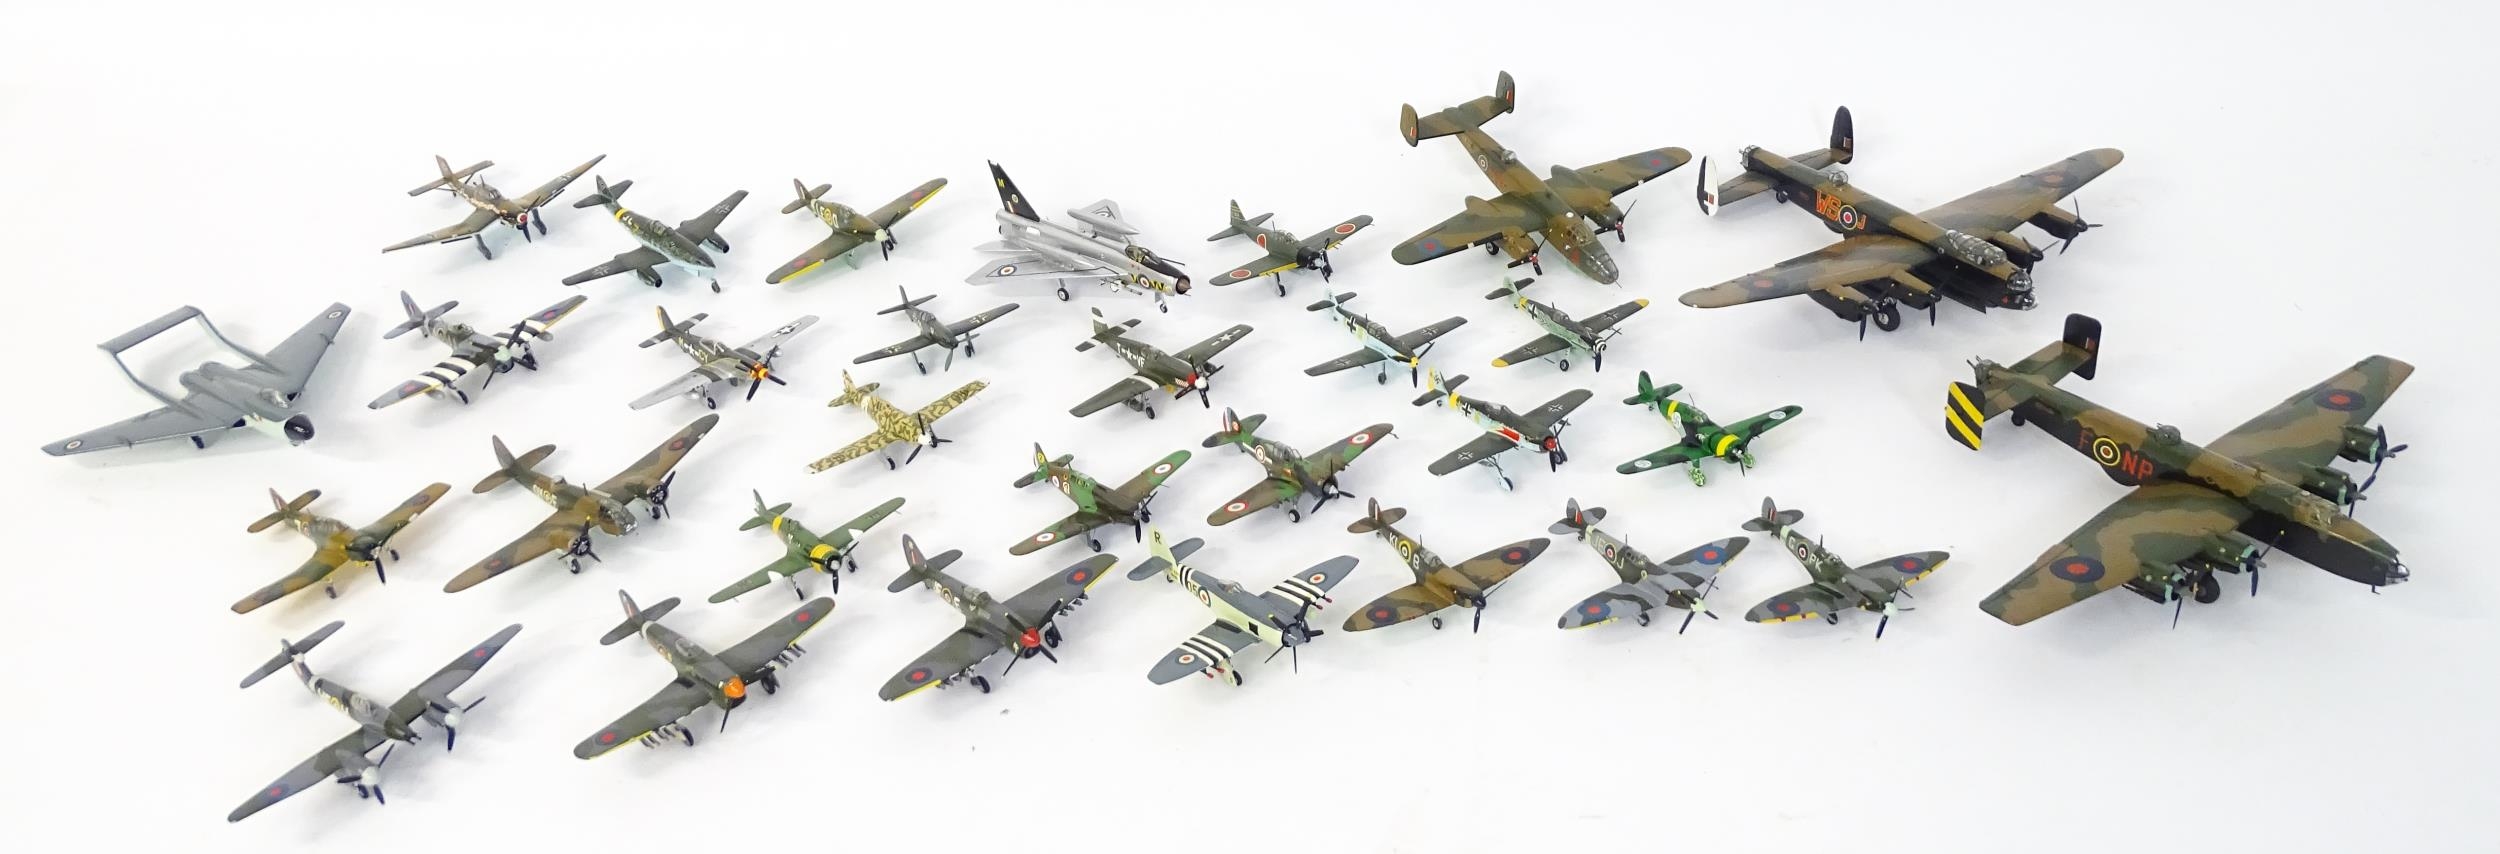 Toys: A quantity of Airfix scale model planes to include Spitfire, Mustang, Halifax Bomber, Avro